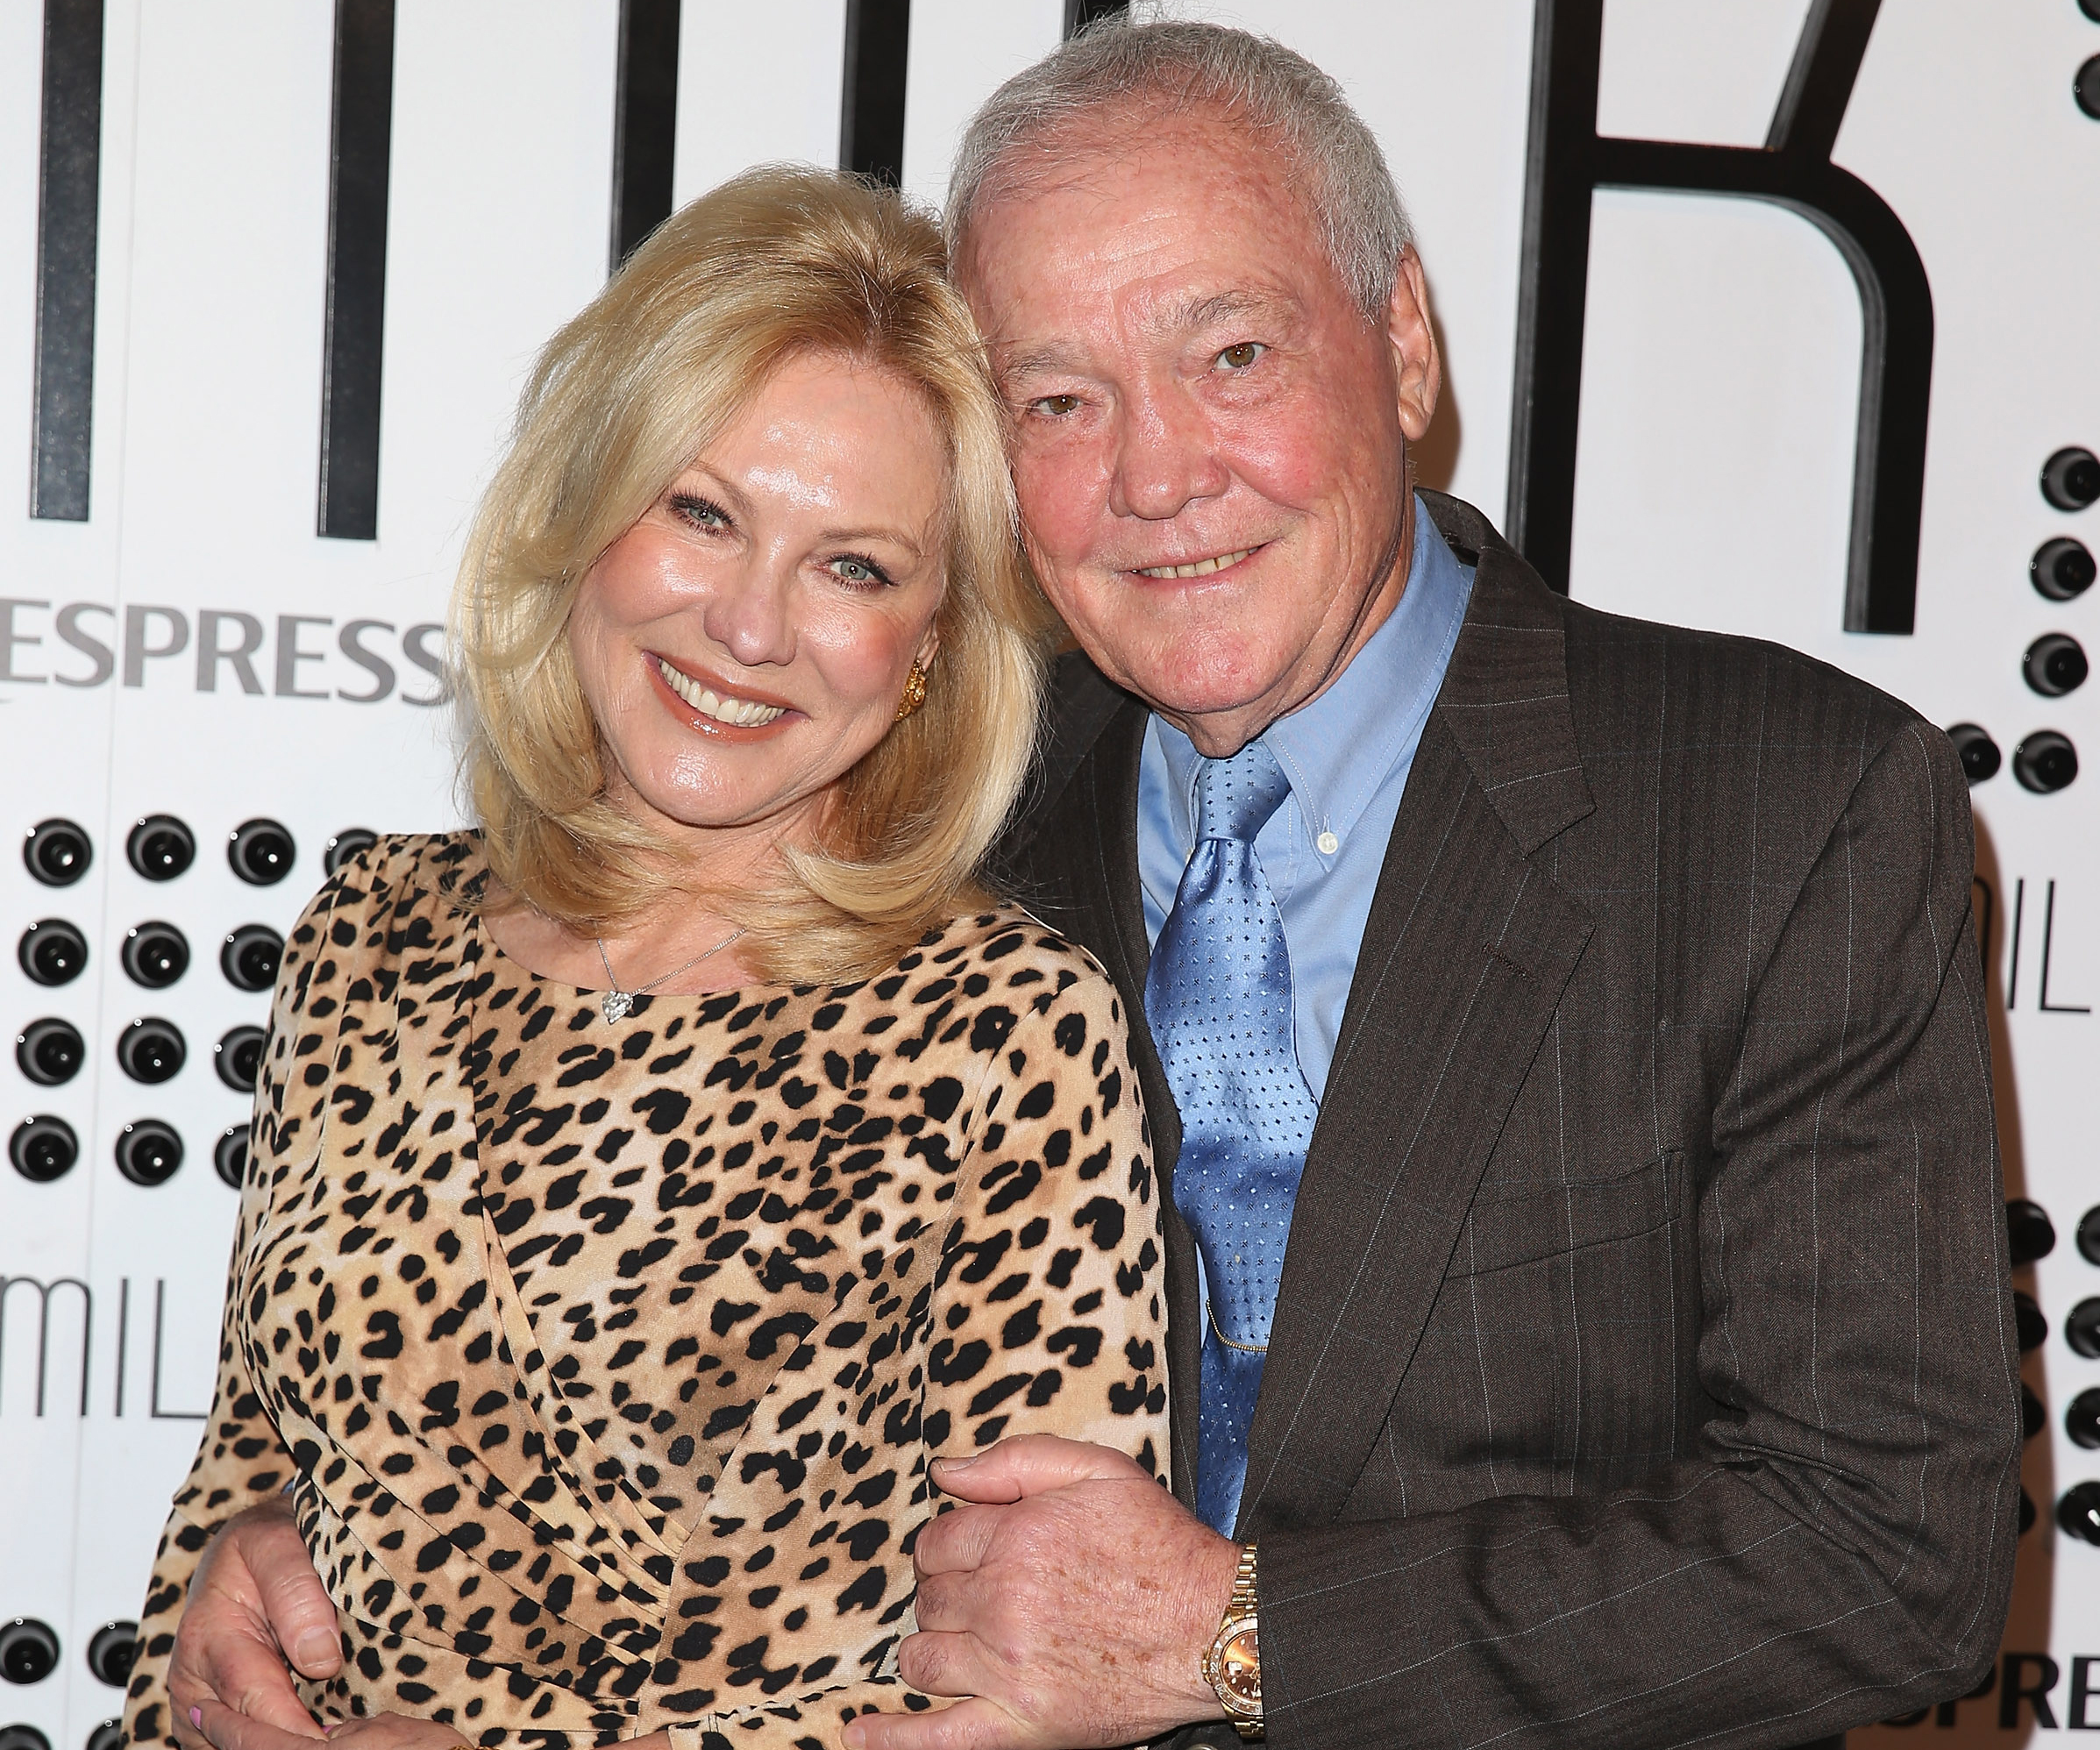 Kerri-Anne Kennerley gives her first interview since her husband’s accident